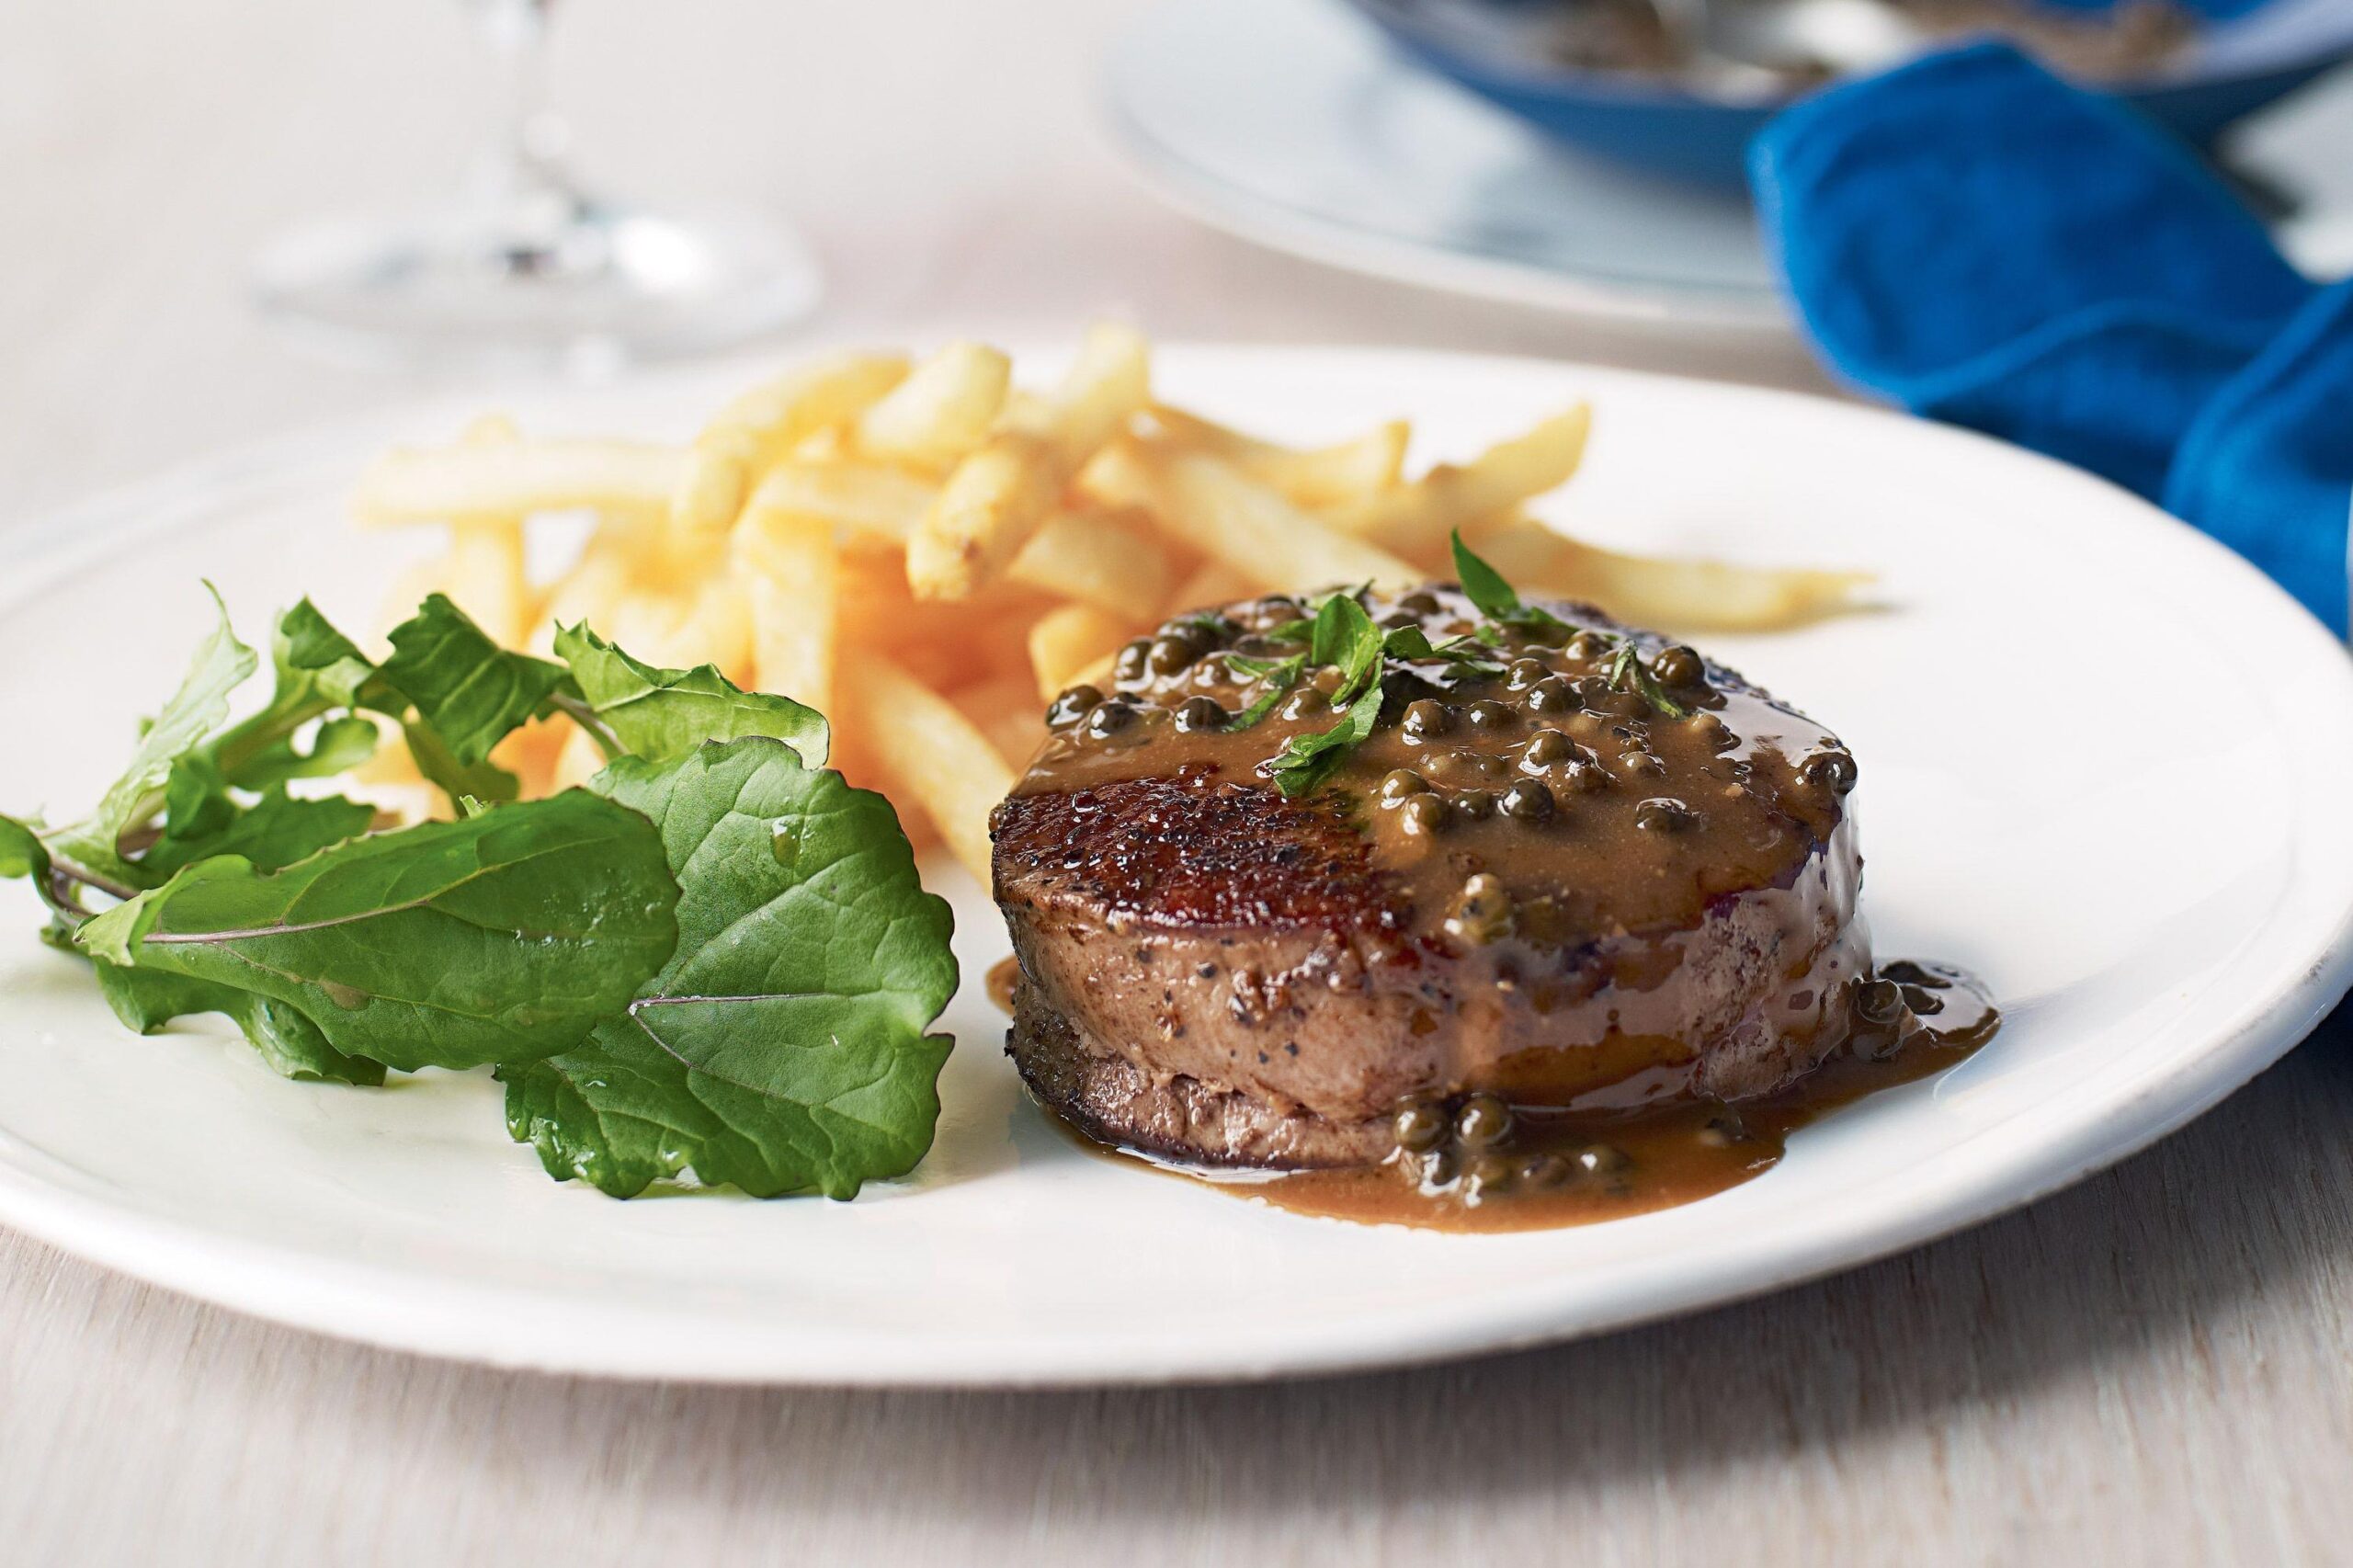  Melt-in-your-mouth steak with a Cabernet and green peppercorn butter is a match made in culinary heaven!